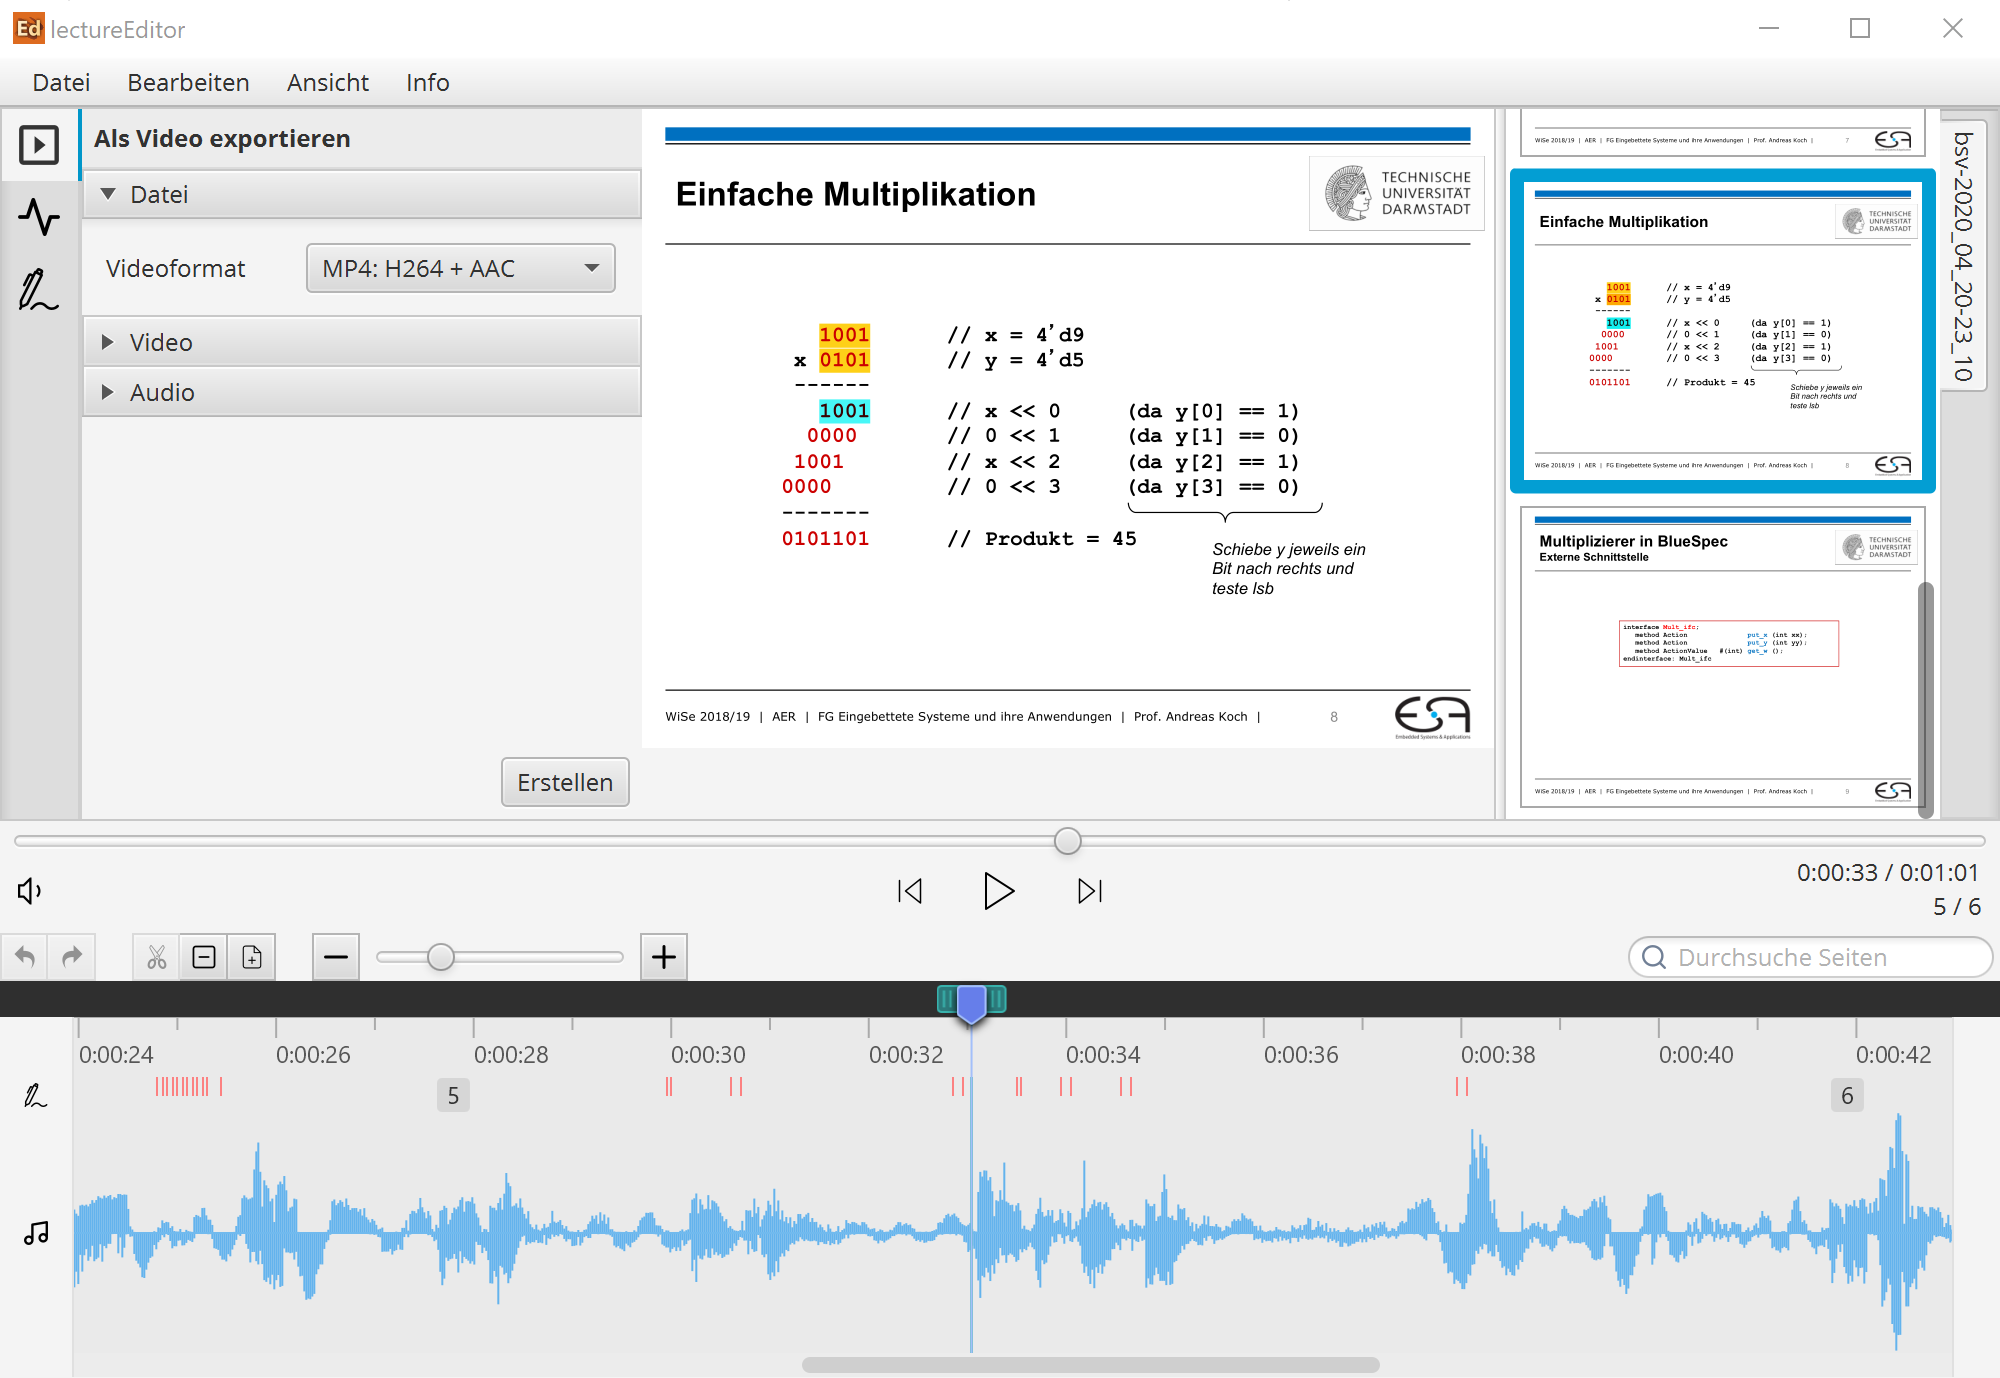 With the help of lectureEditor, recordings can be edited and exported in common video formats.